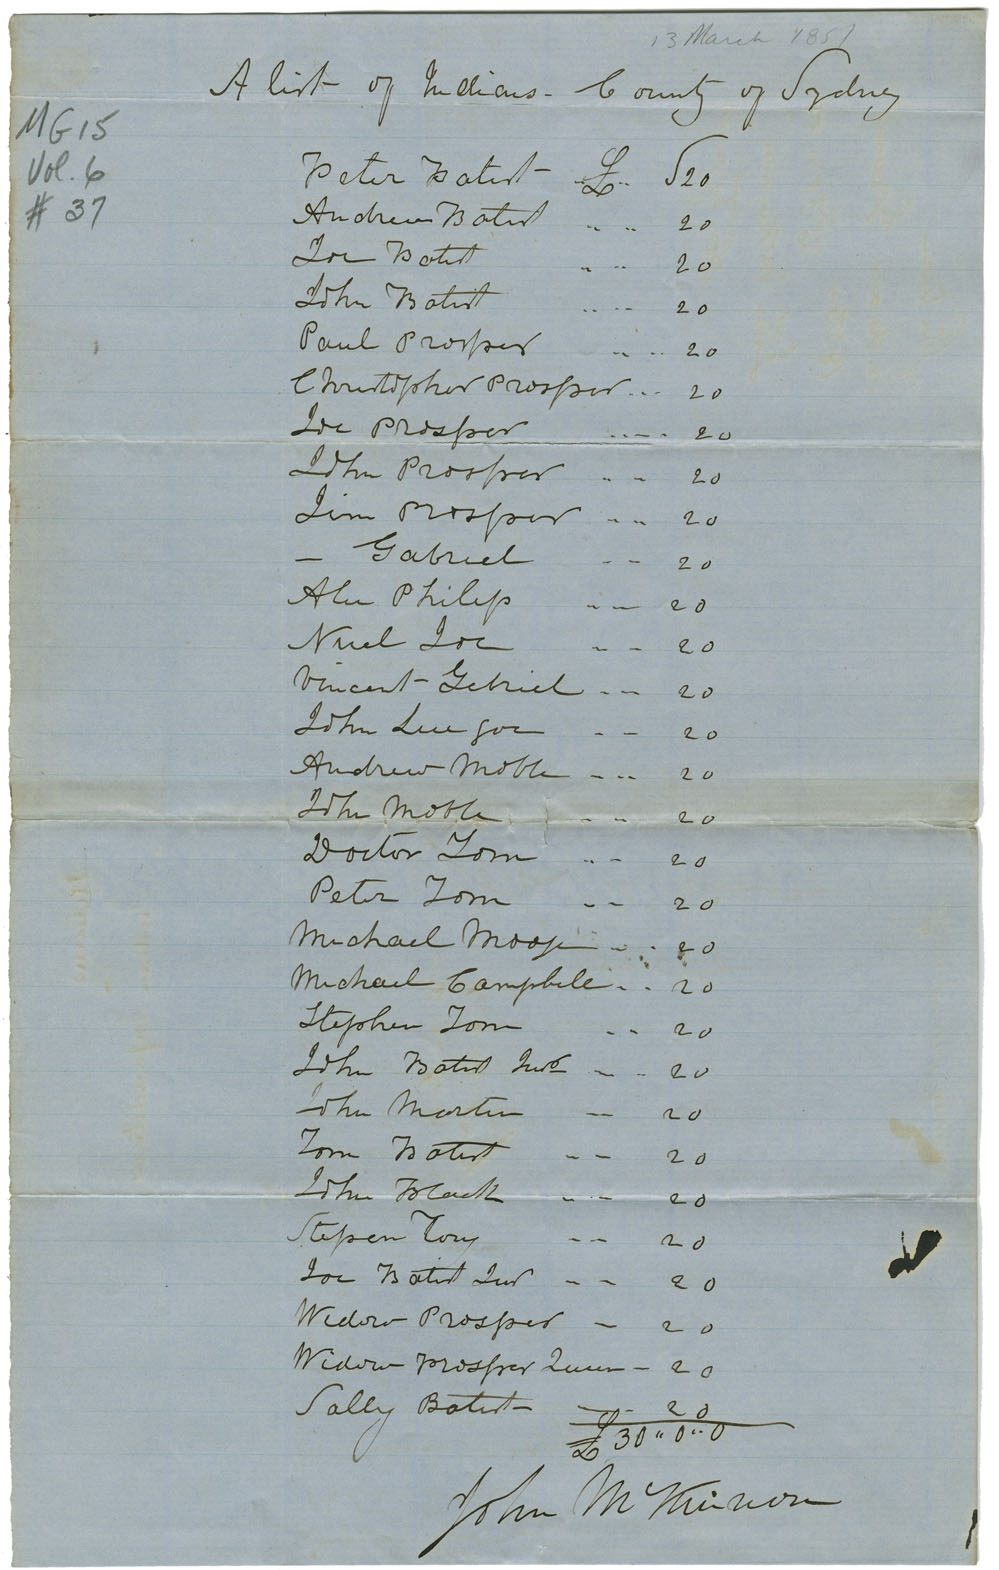 Account of expenditures of £30-0-0 in Sydney County.